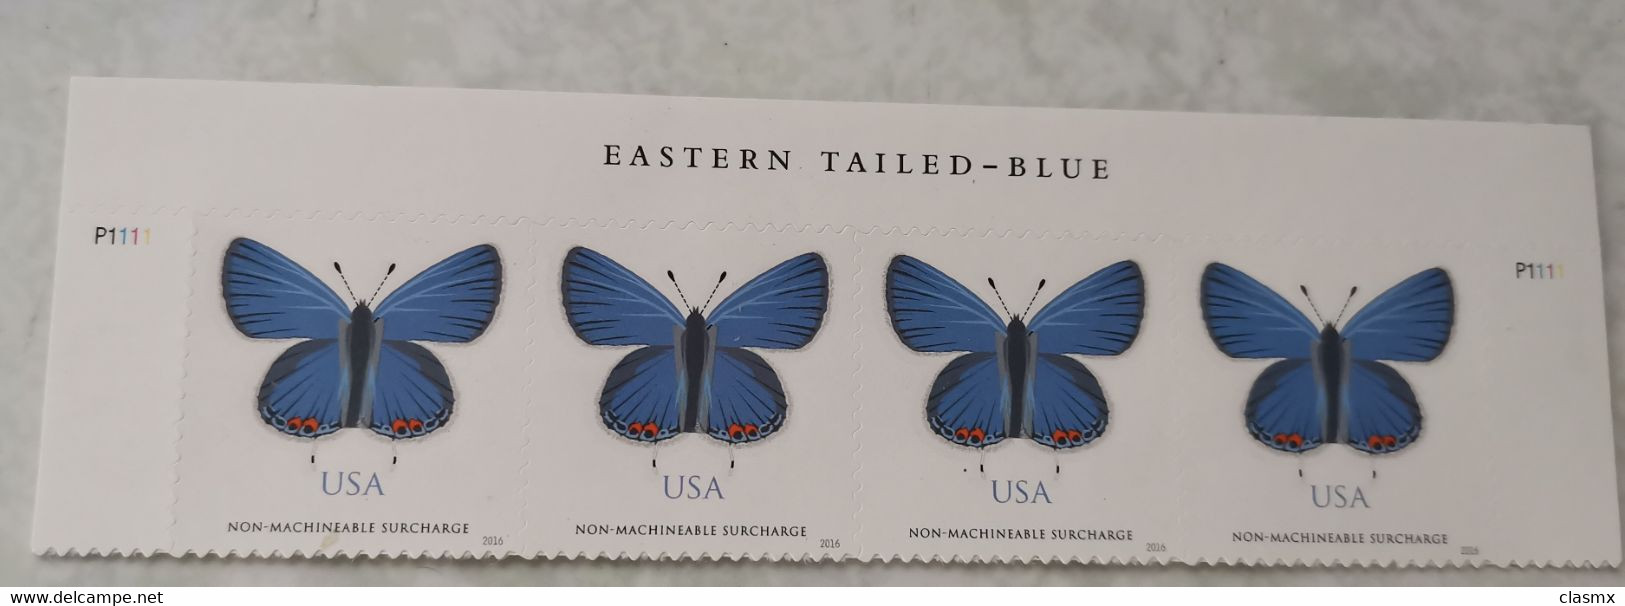 USA Blue Butterflies STAMPS MNH EASTERN TILED BLUE - Nuovi